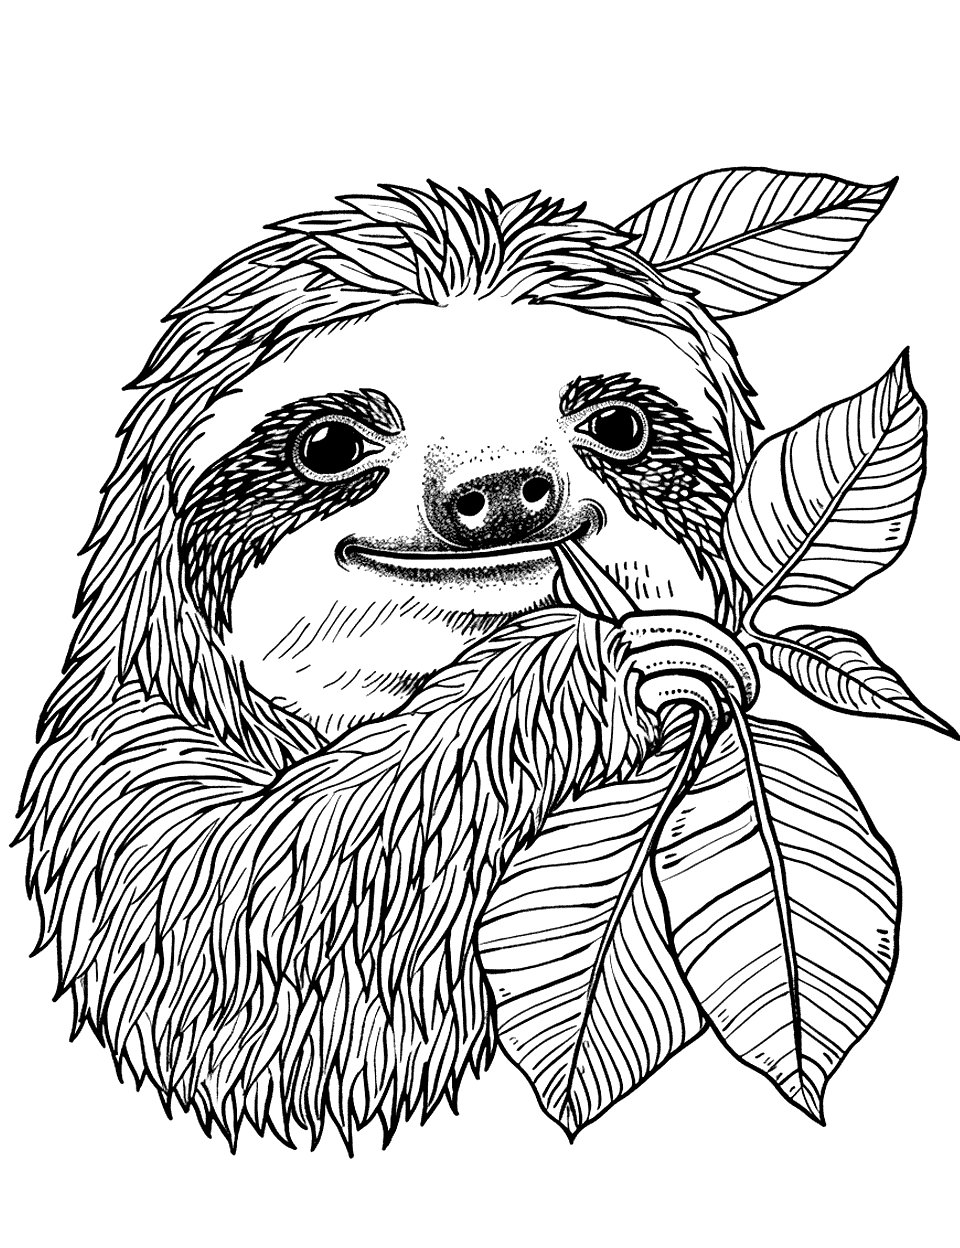 Sloth Enjoying a Snack Coloring Page - A scene where a sloth is munching on a leaf.